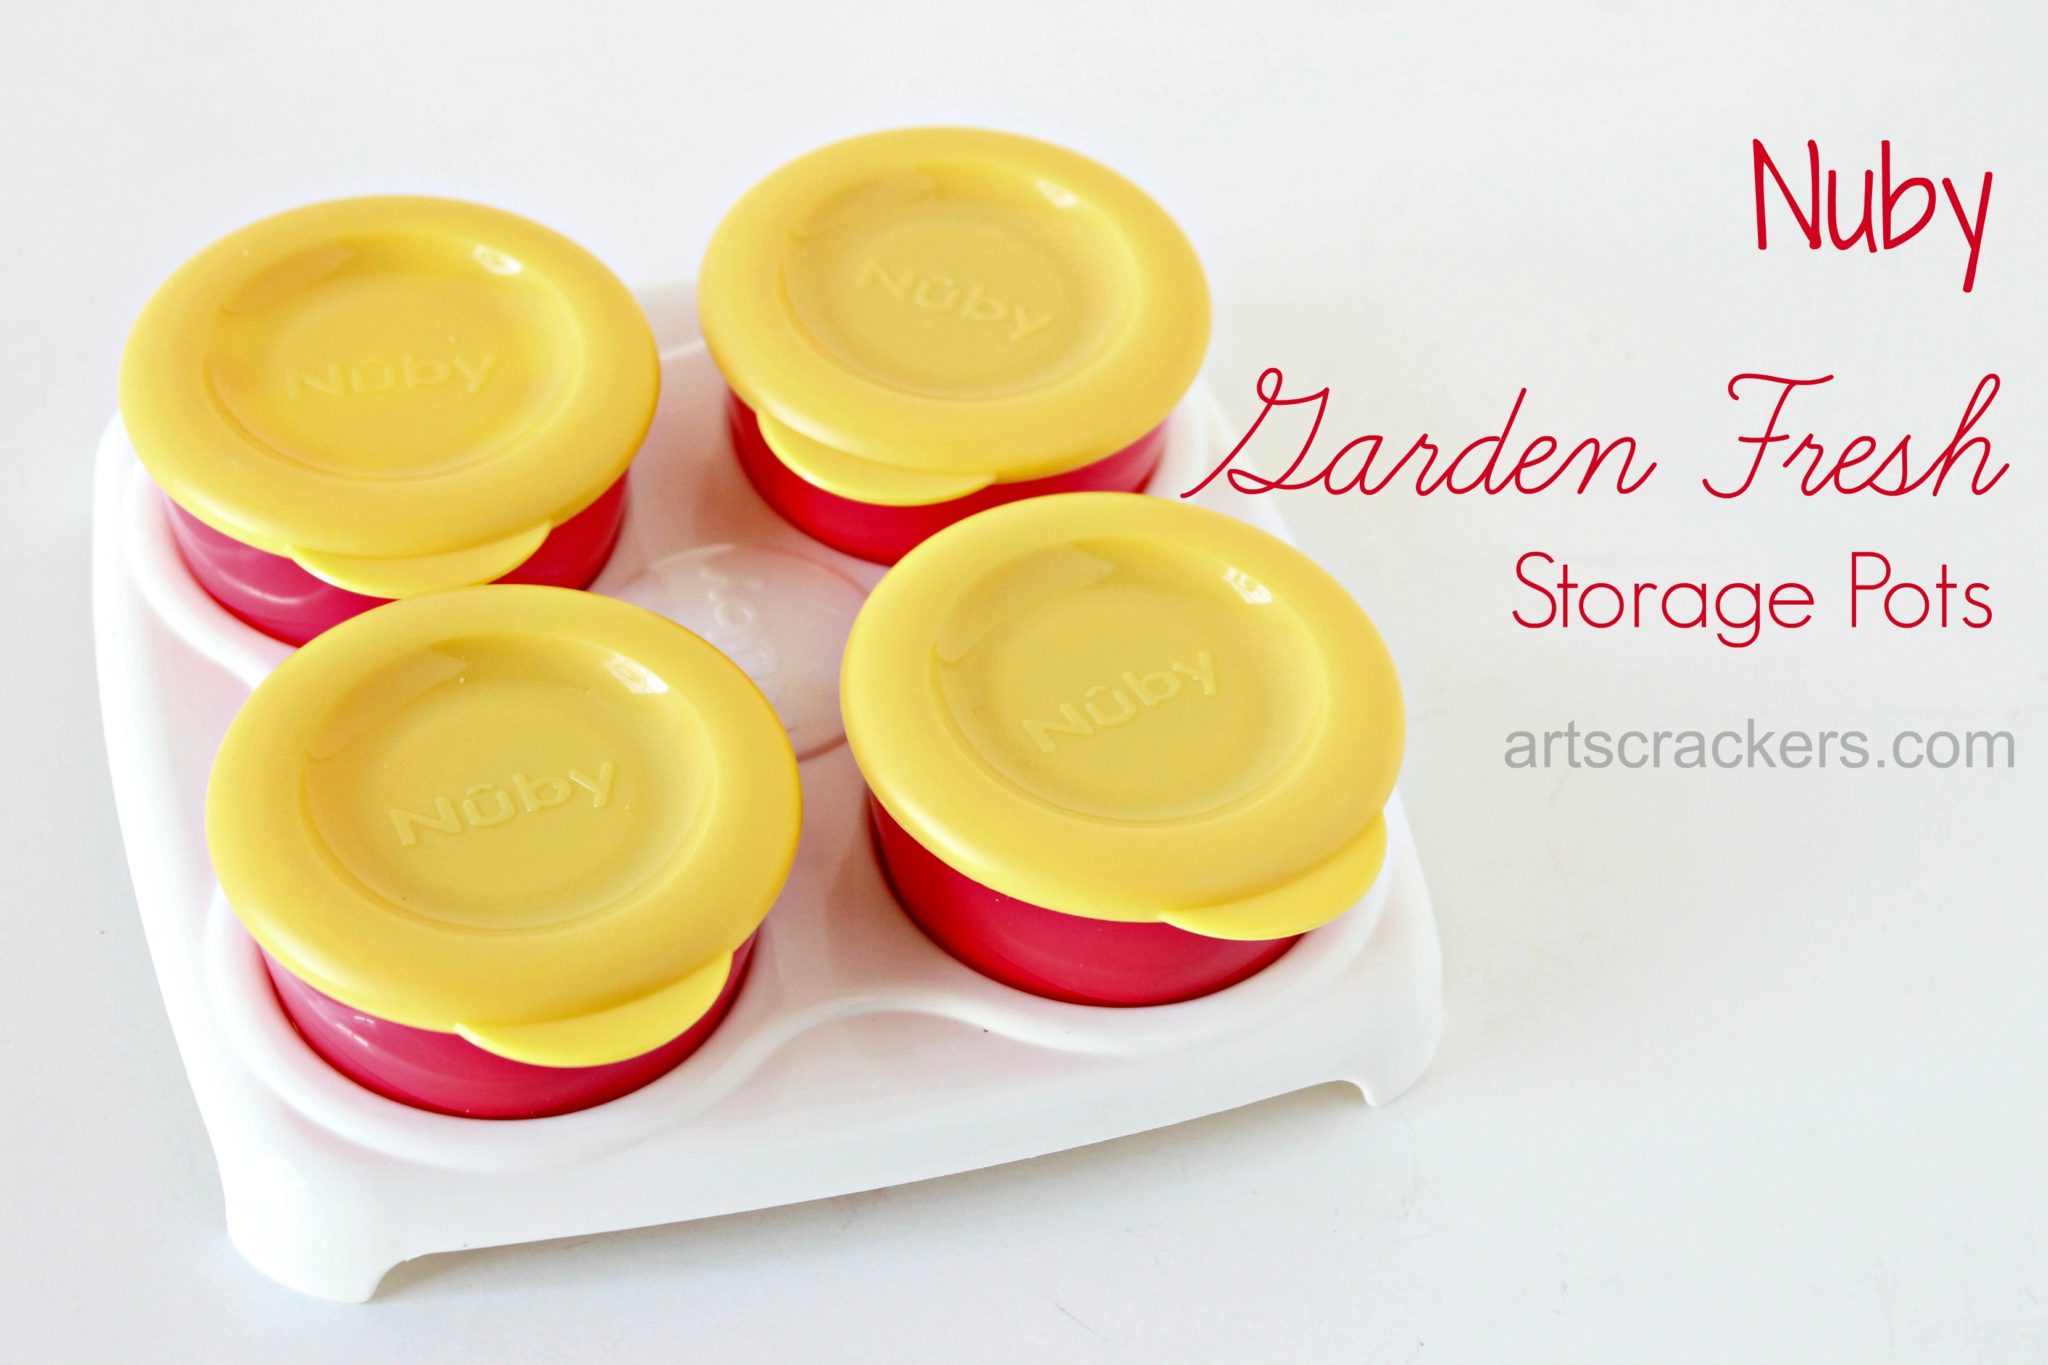 Nuby Garden Fresh Storage Pots. Click the picture to read the review.